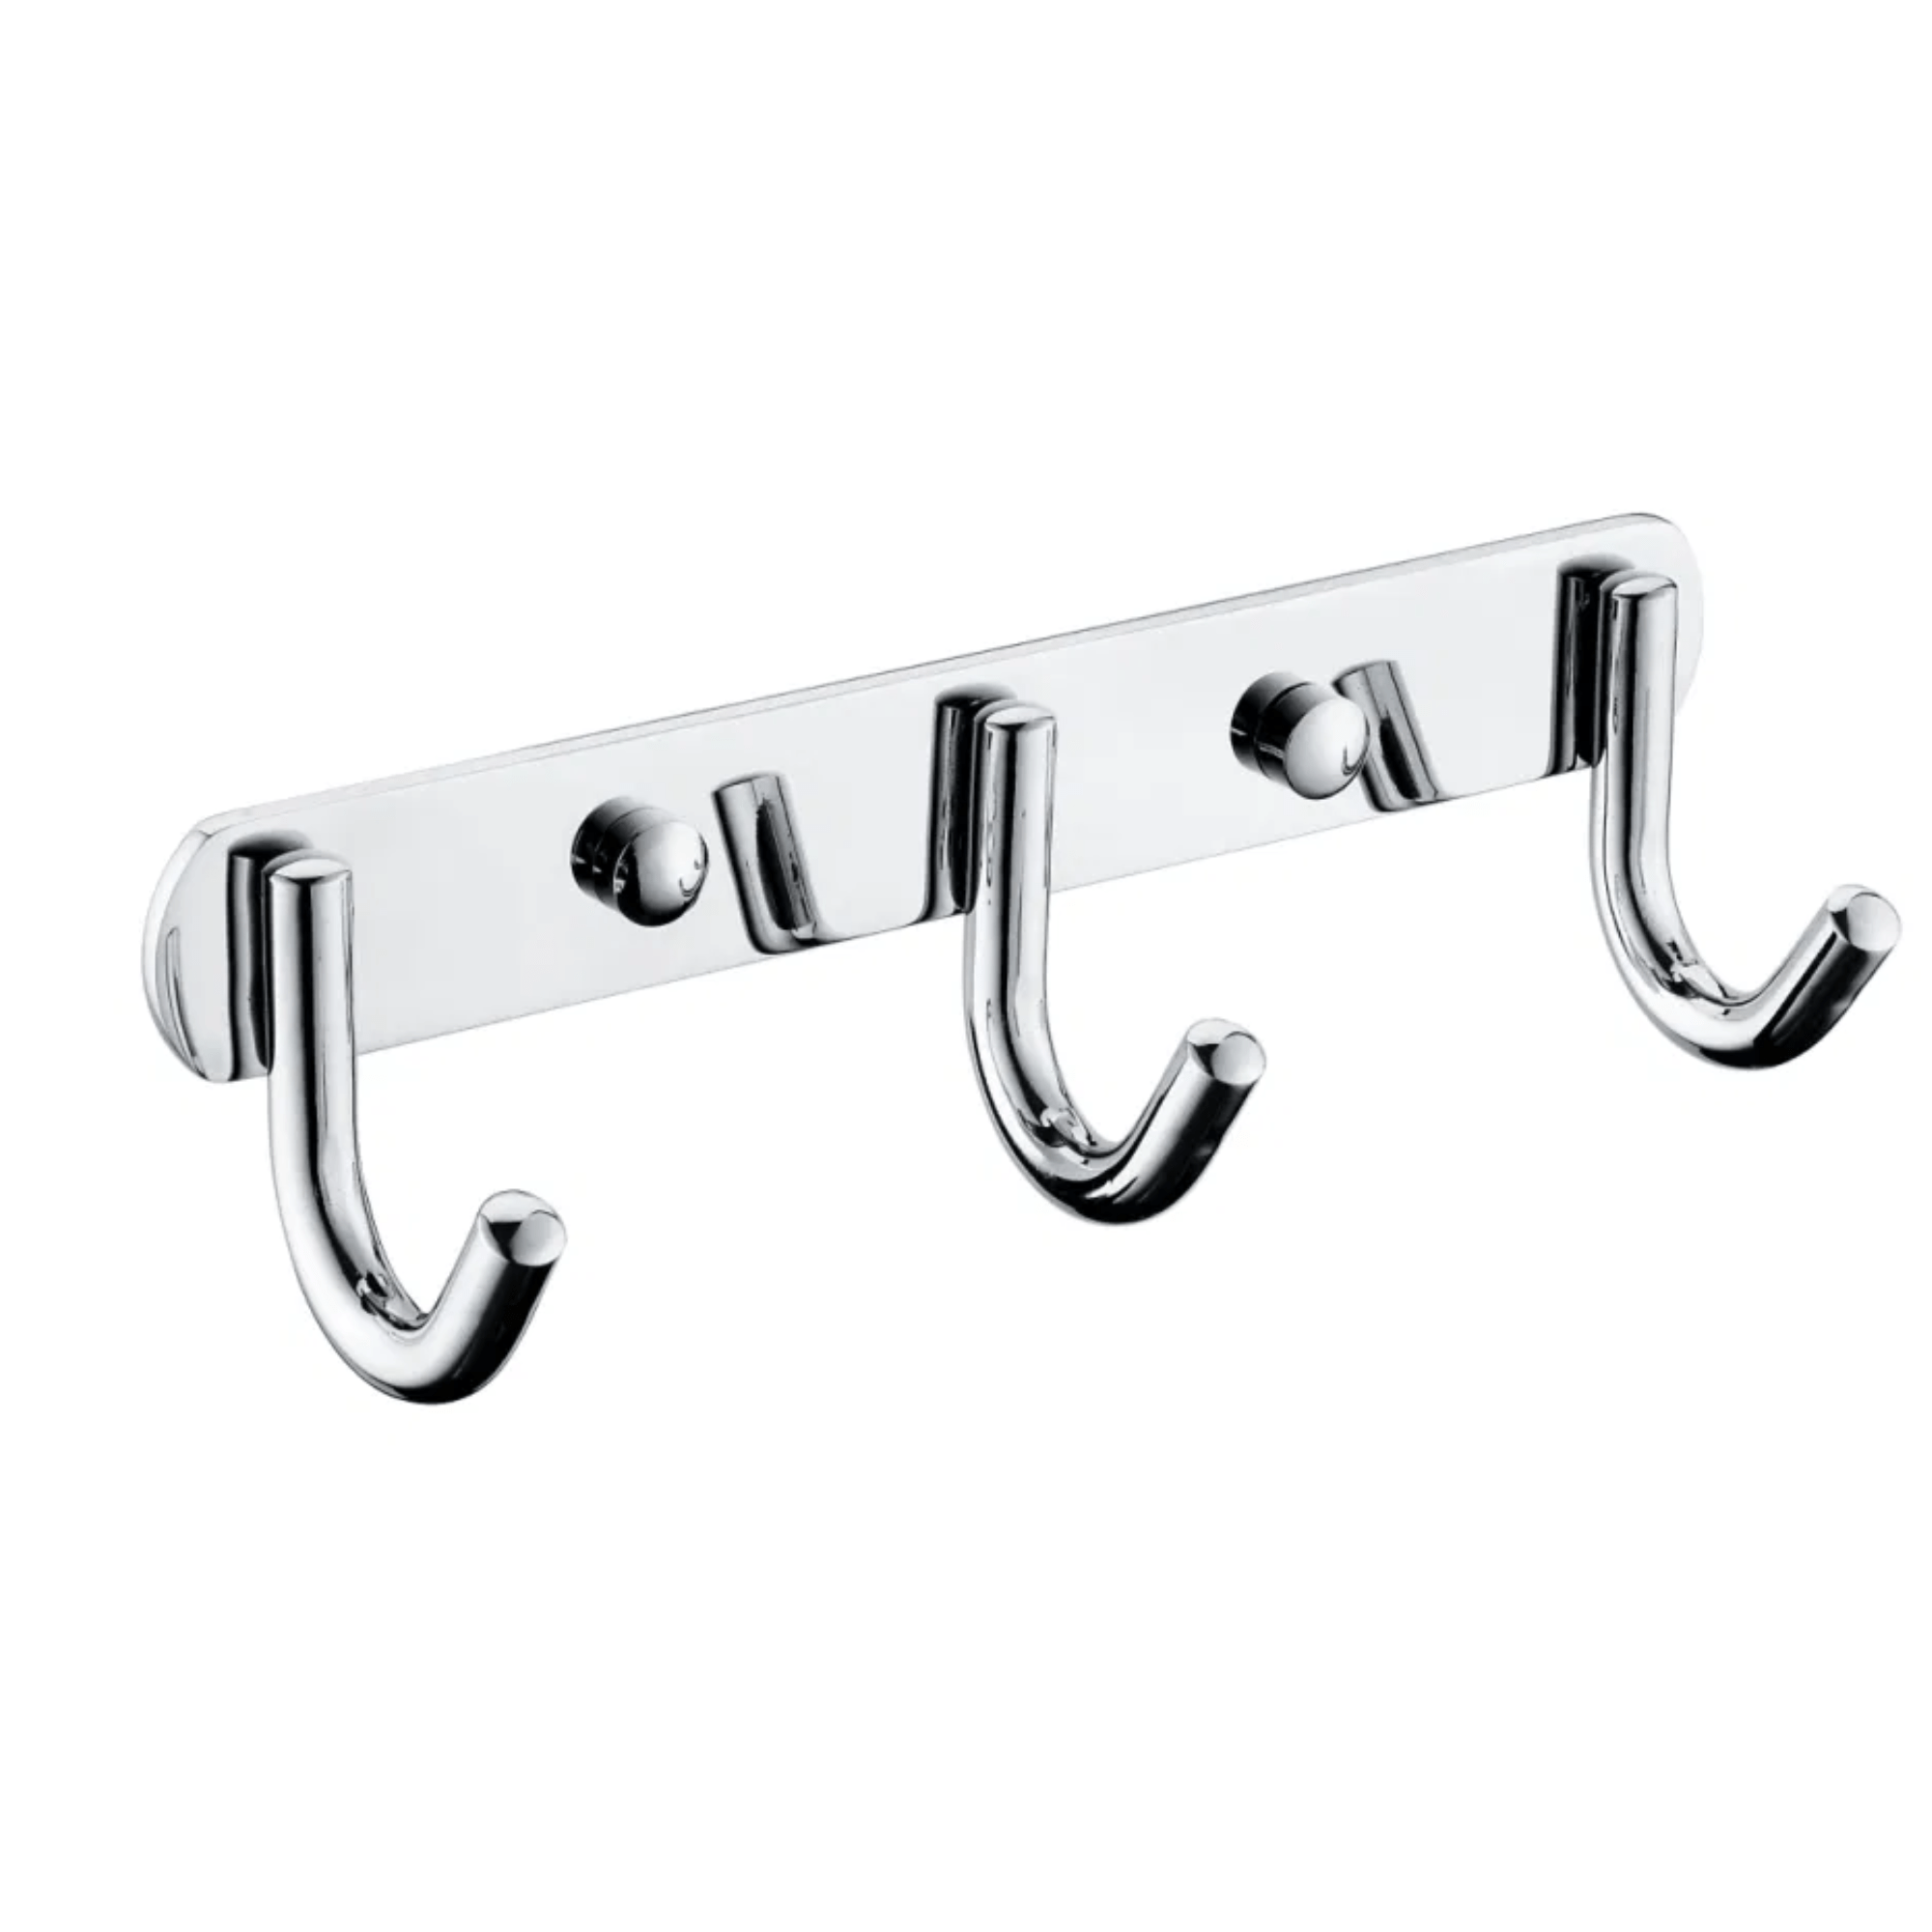 Shop Bathroom Stainless Steel Chrome Hook Rail - 3, 4, or 5 Hooks | Buy Online at Supply Master Accra, Ghana Bathroom Accessories 3-Hooks Buy Tools hardware Building materials